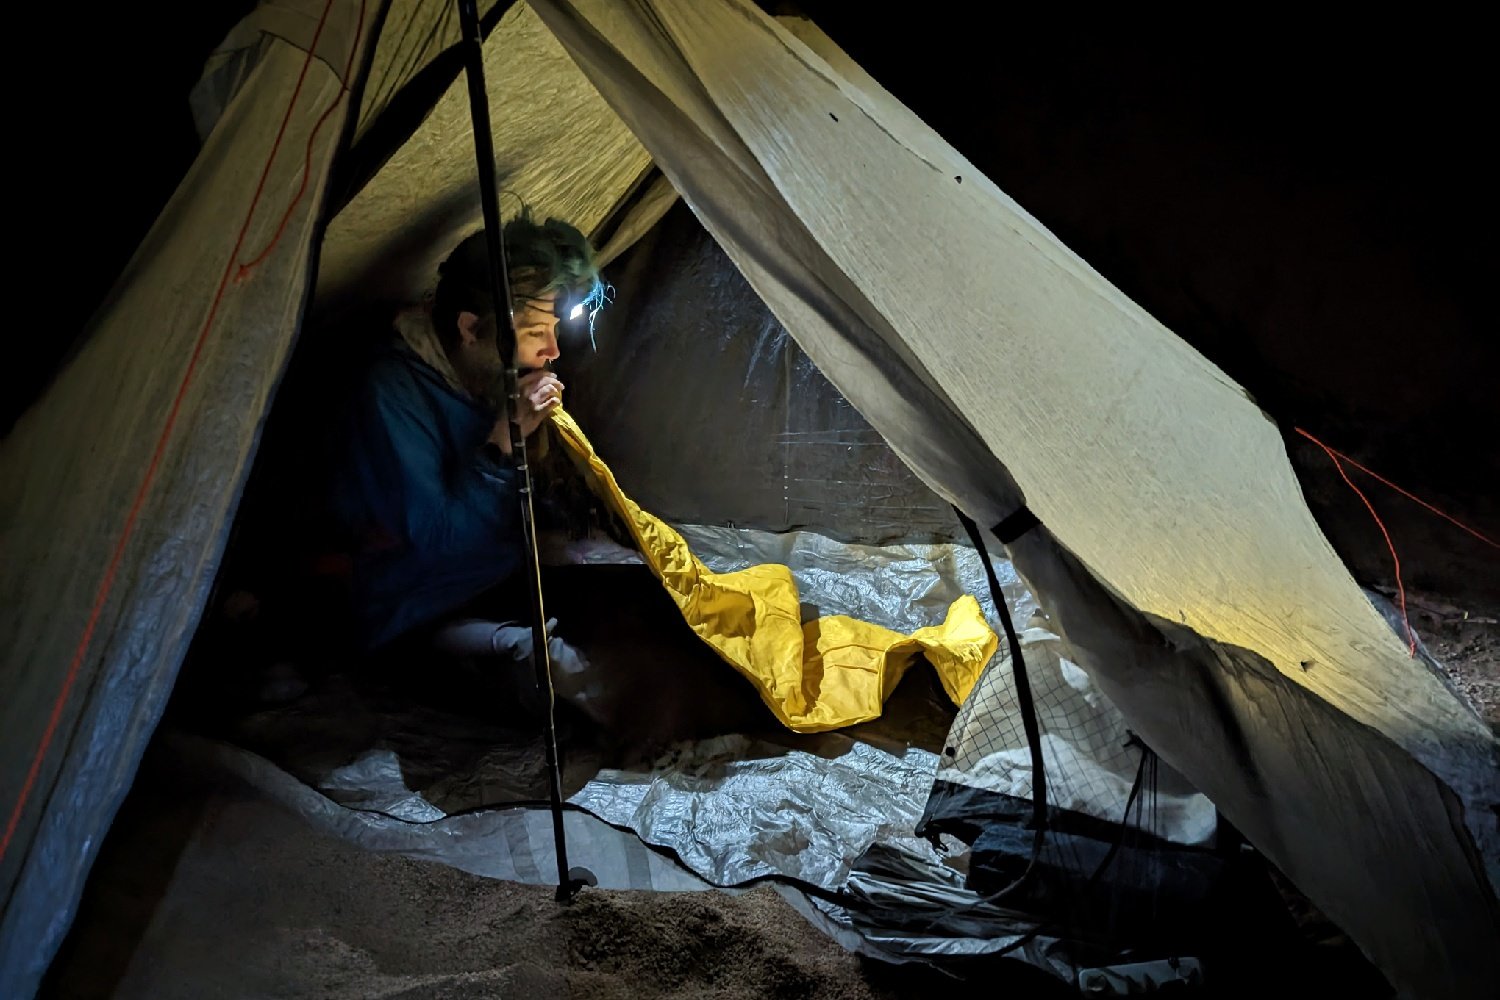 A hiker sitting in a tent blowing up a sleeping pad. It's night time and the hiker has a Nitecore NU25 UL headlamp on to light the interior of the tent